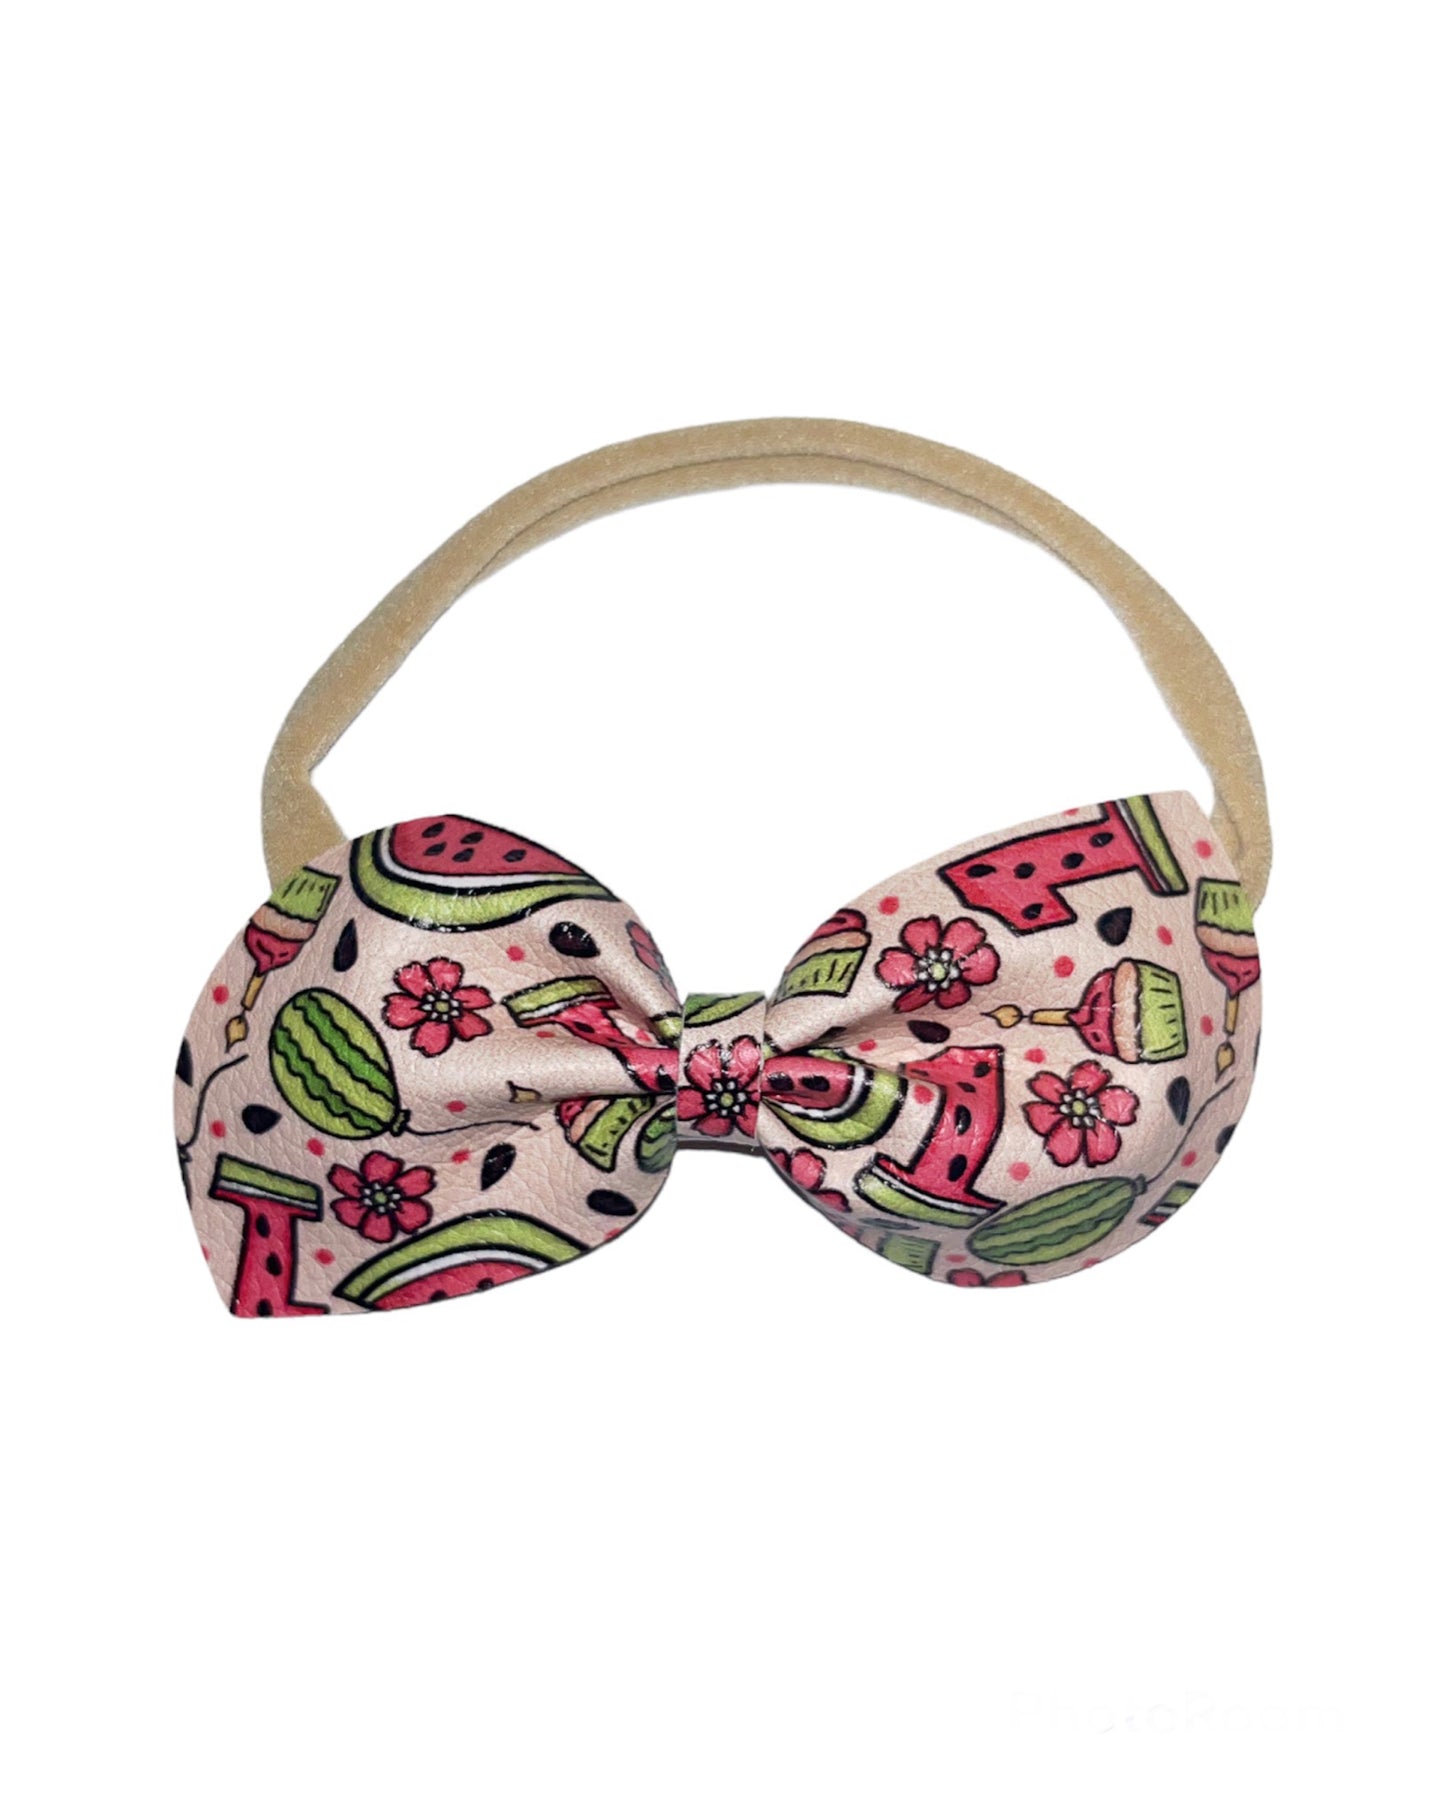 One in a Melon Jane Bow!